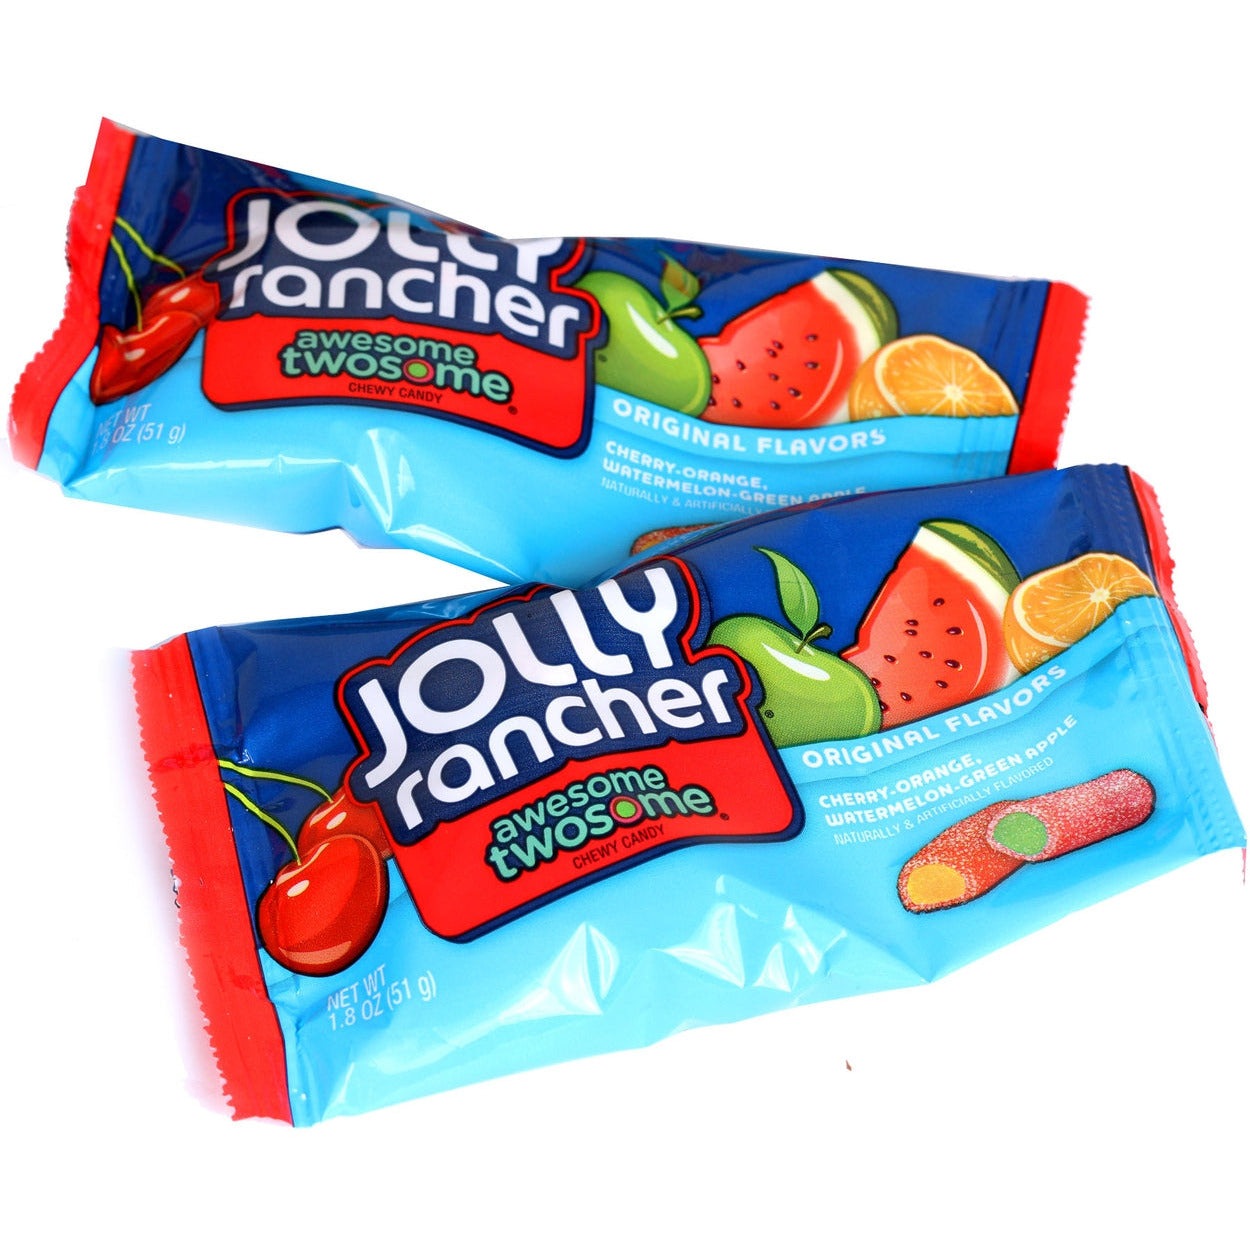 Awesome Twosome Jolly Rancher Bites